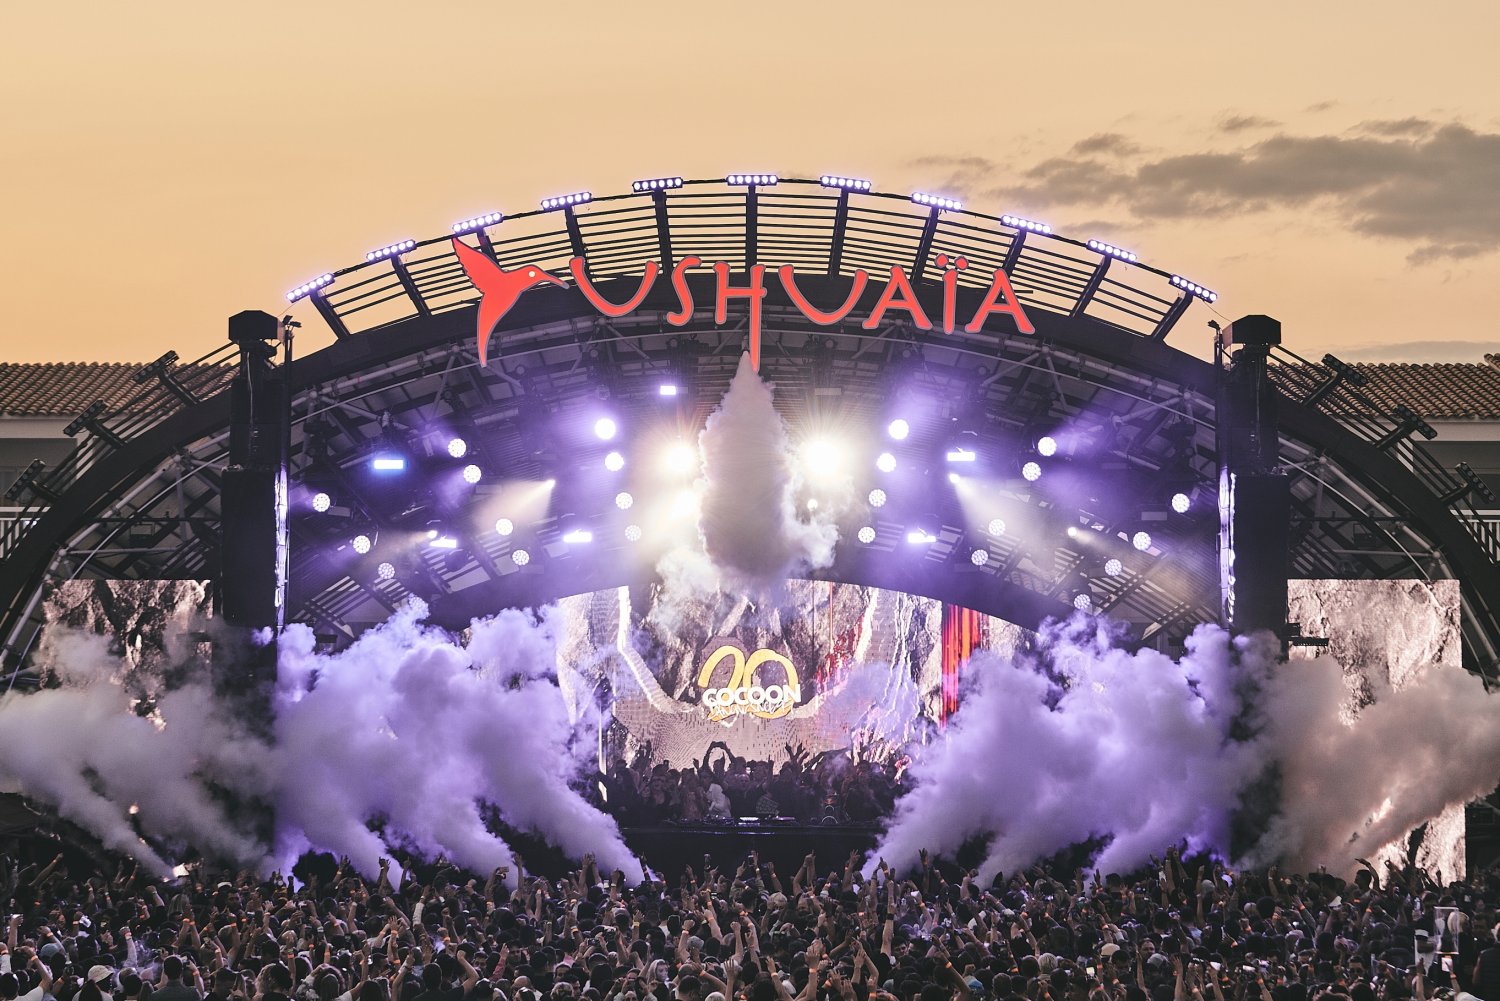 Win a main stage DJ set at this year's FLY Open Air festival